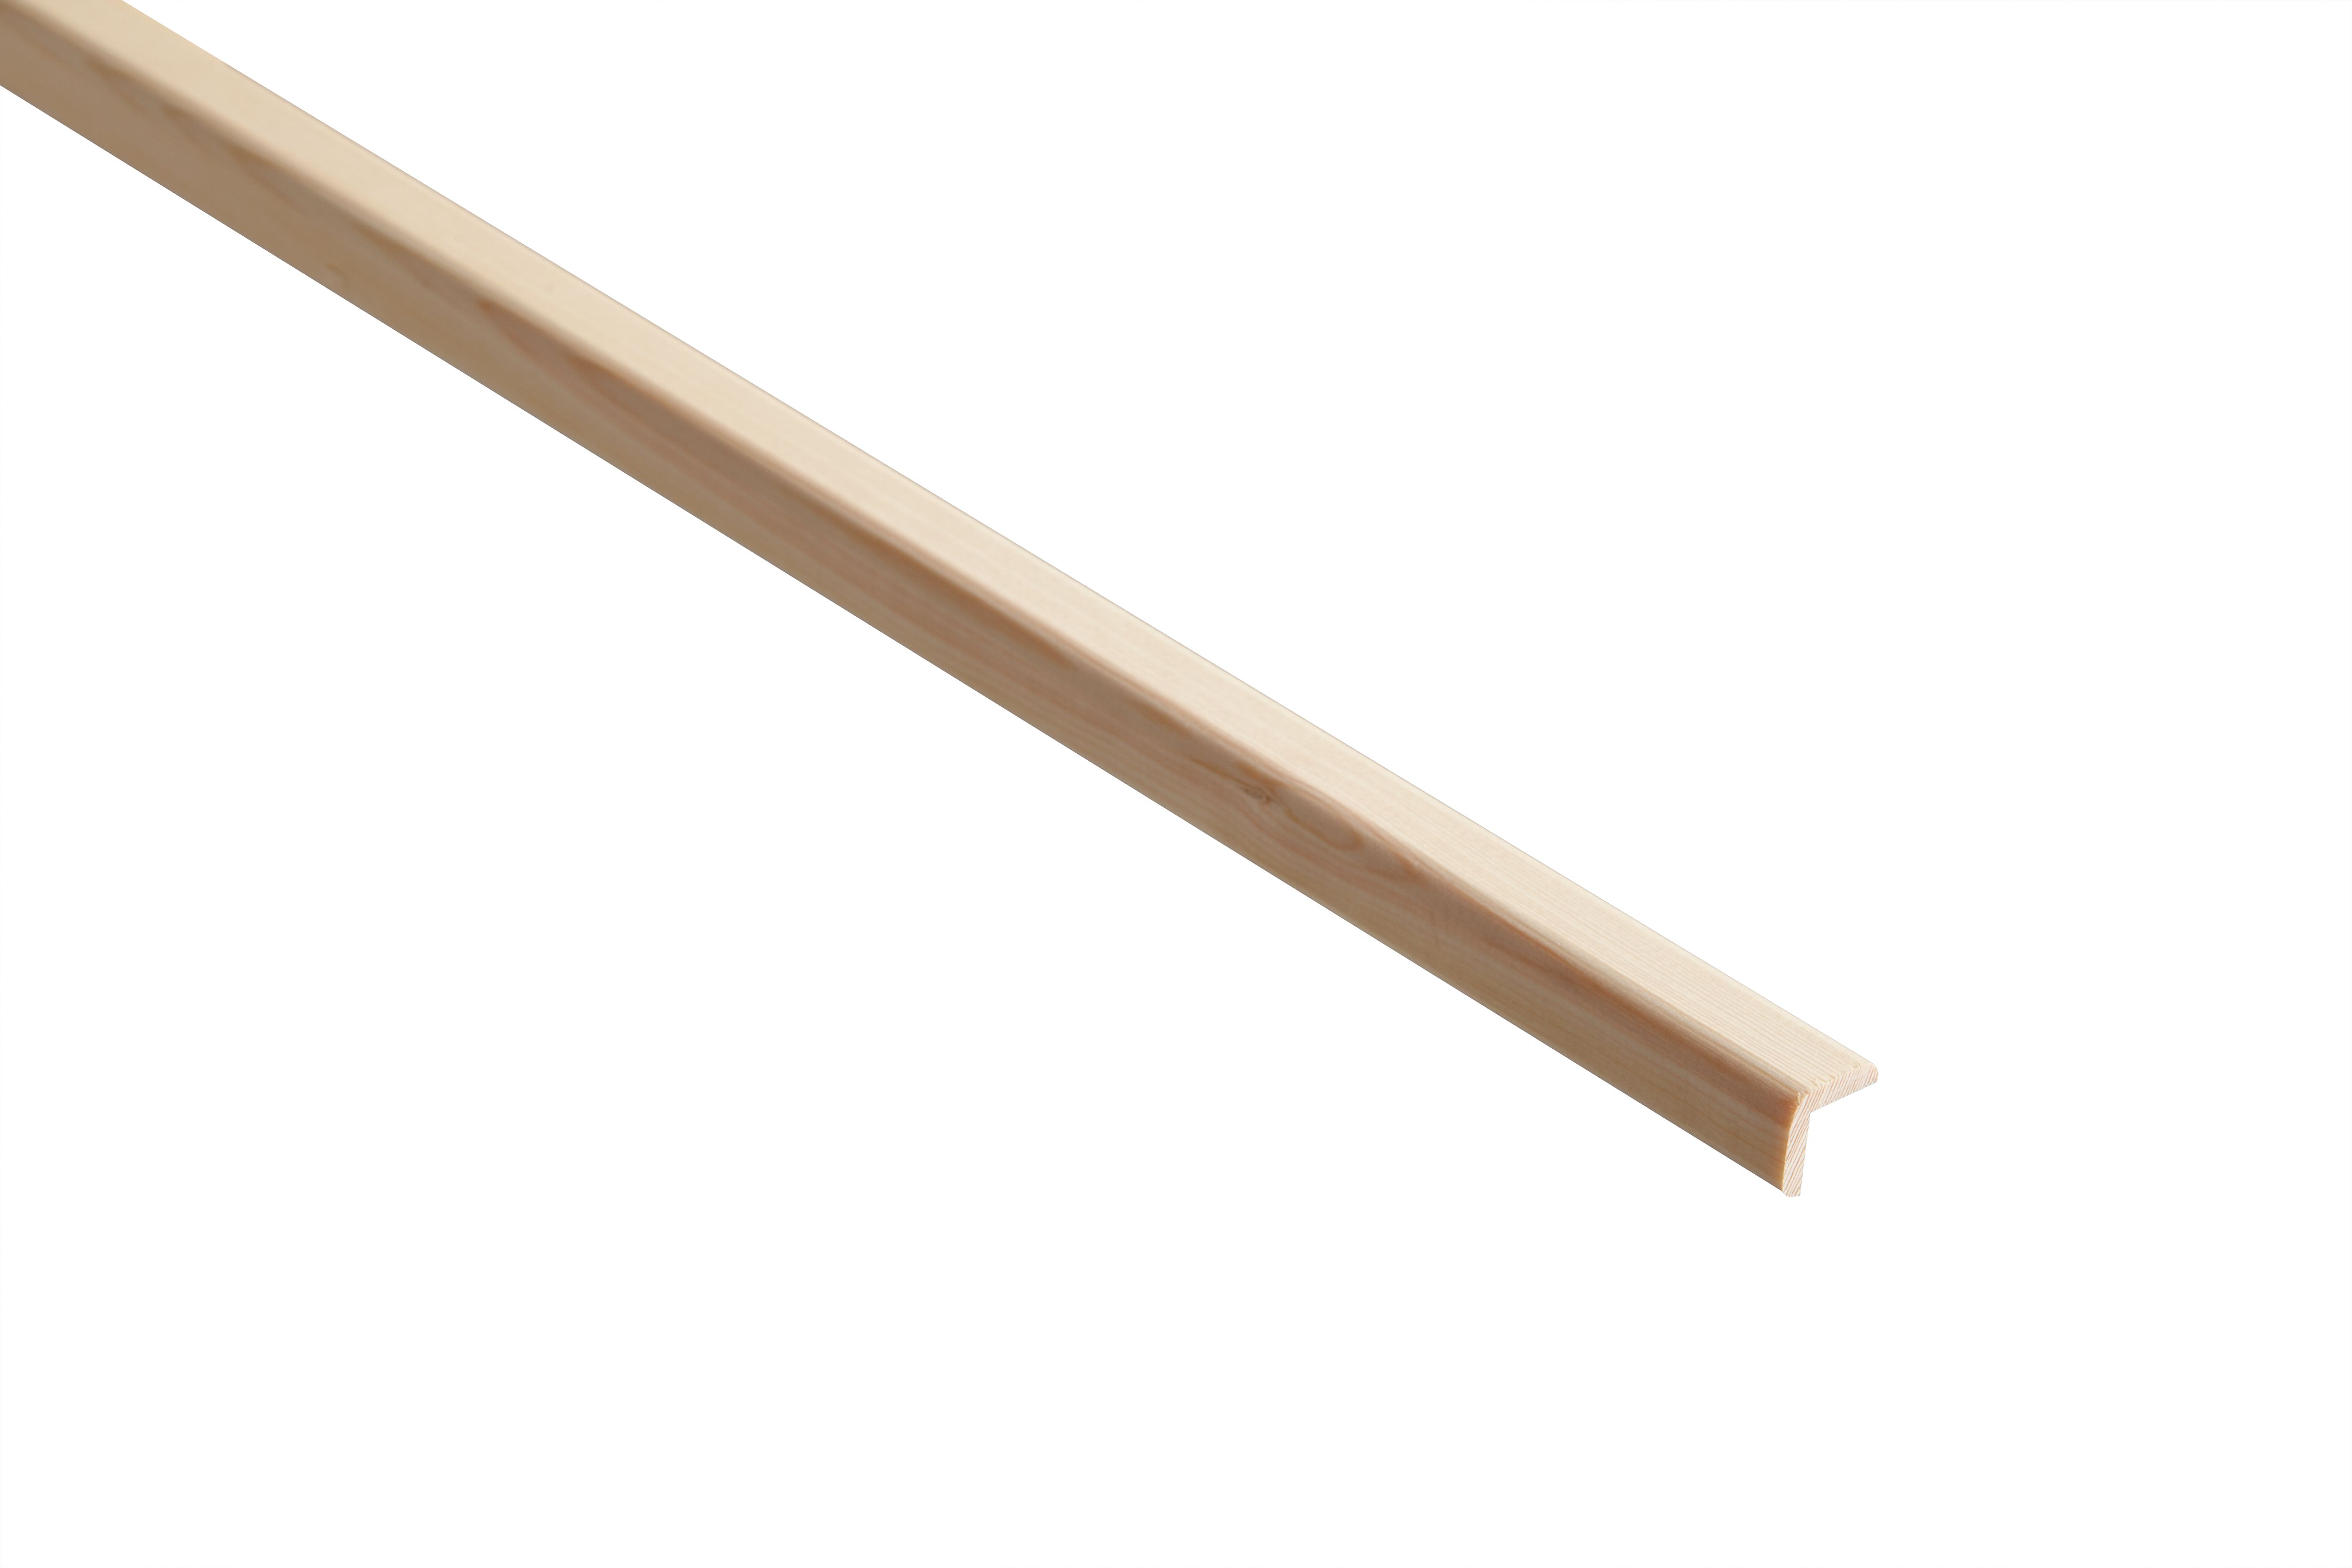 Image of Wickes Pine Round Edge Angle Moulding - 20 x 20 x 2400mm